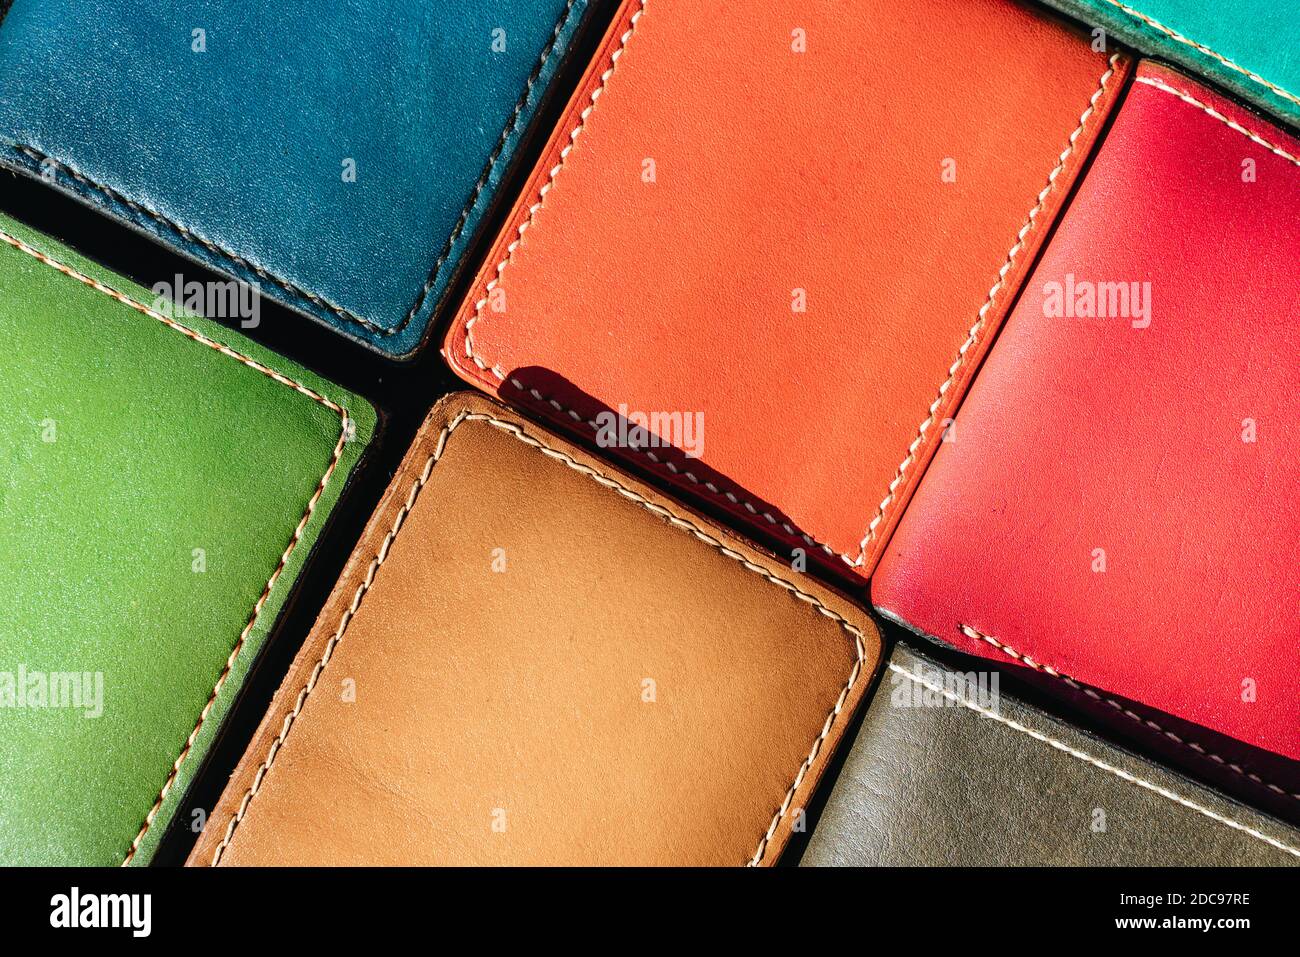 Handmade leather men's wallet. Multi-colored texture. Leather craft Stock Photo